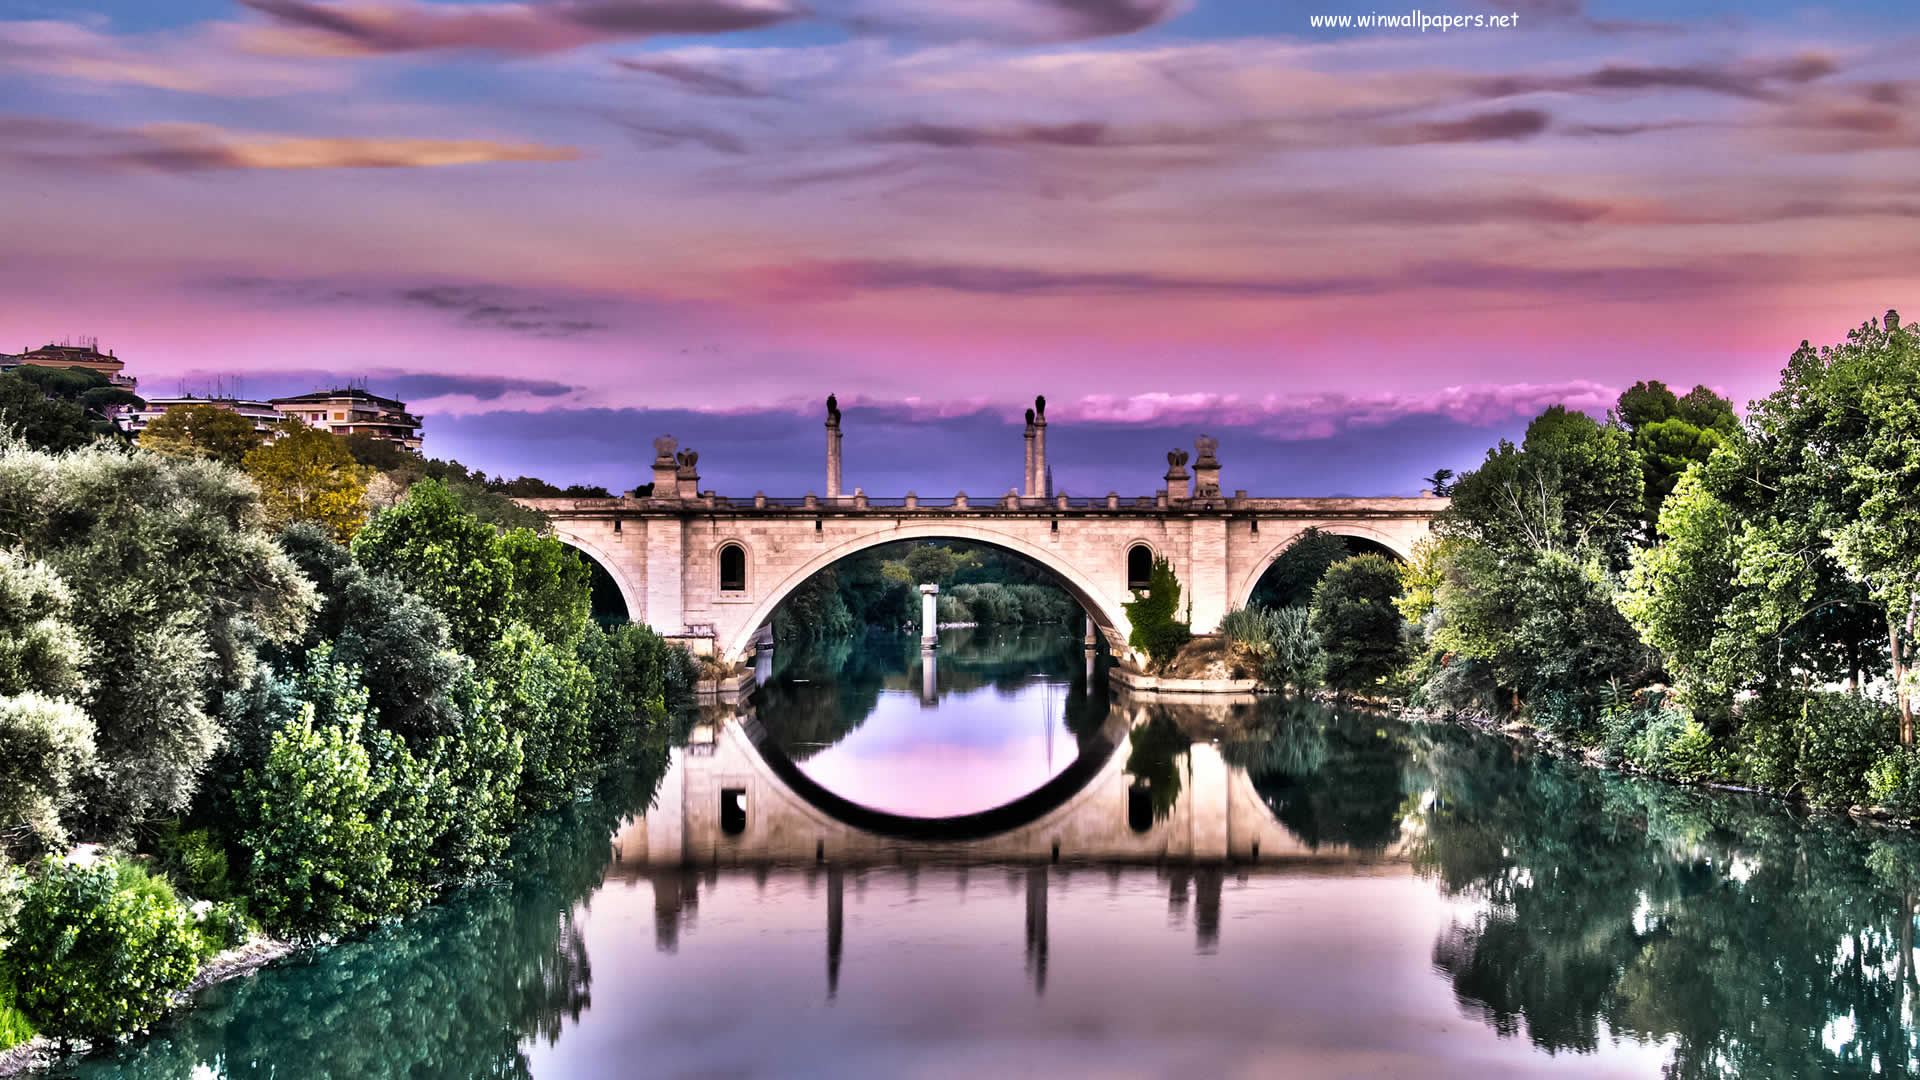 HD Roma Wallpaper Post has been published on windows